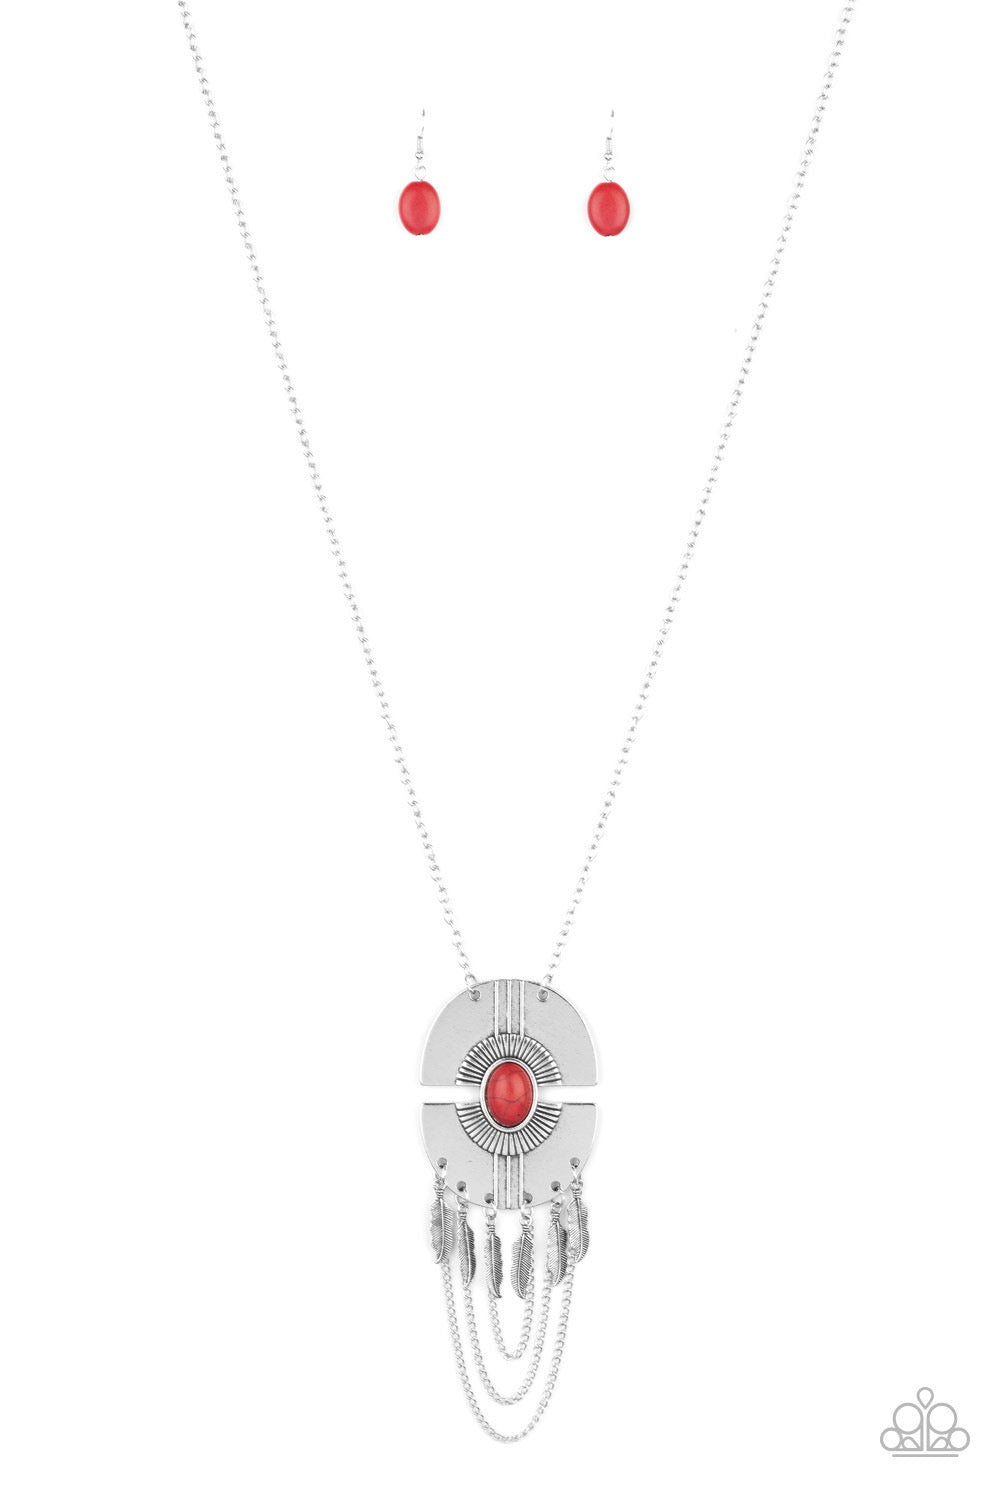 Desert Culture Necklace - Red